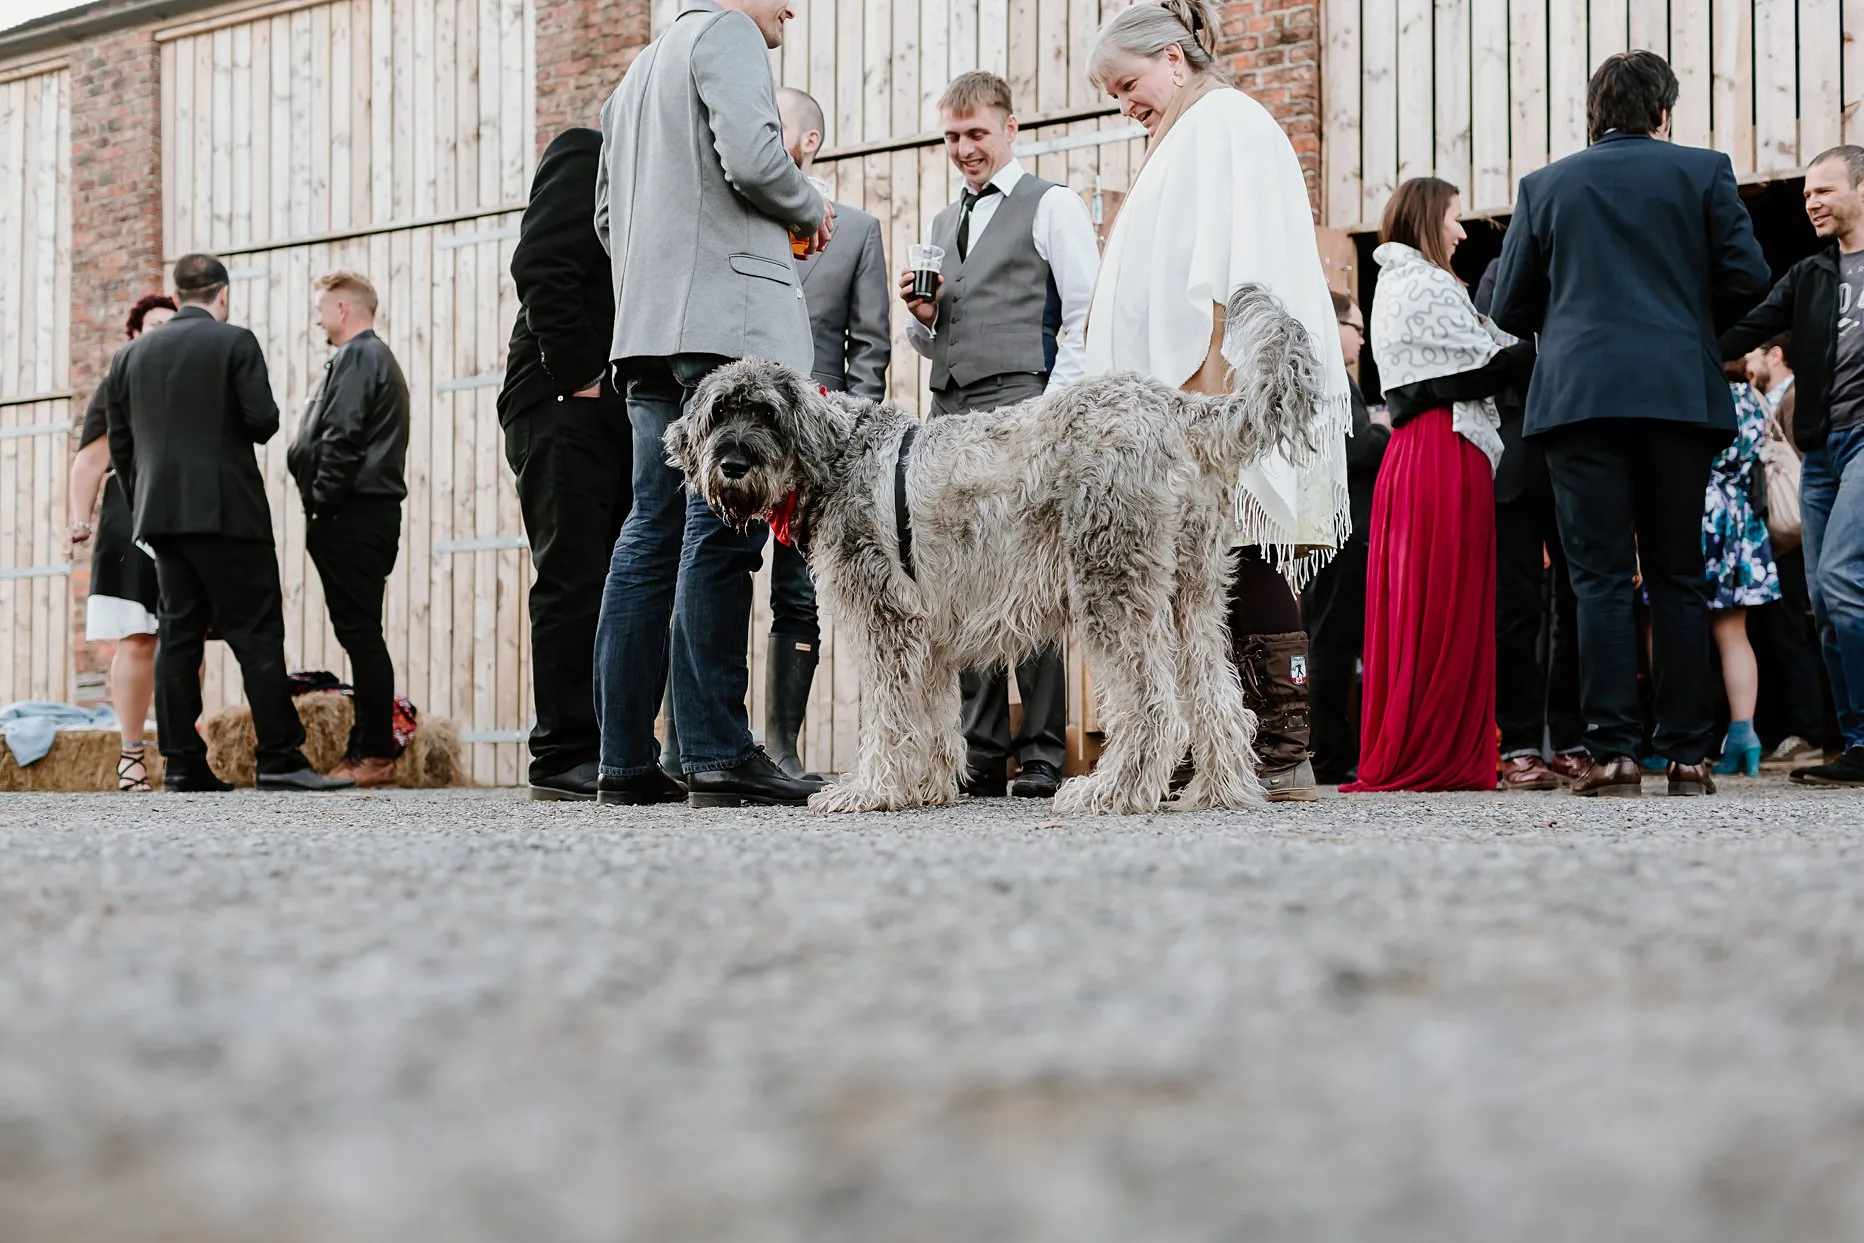 Large grey dog stood with wedding guests outside the Hay Barn at Camp Katur.